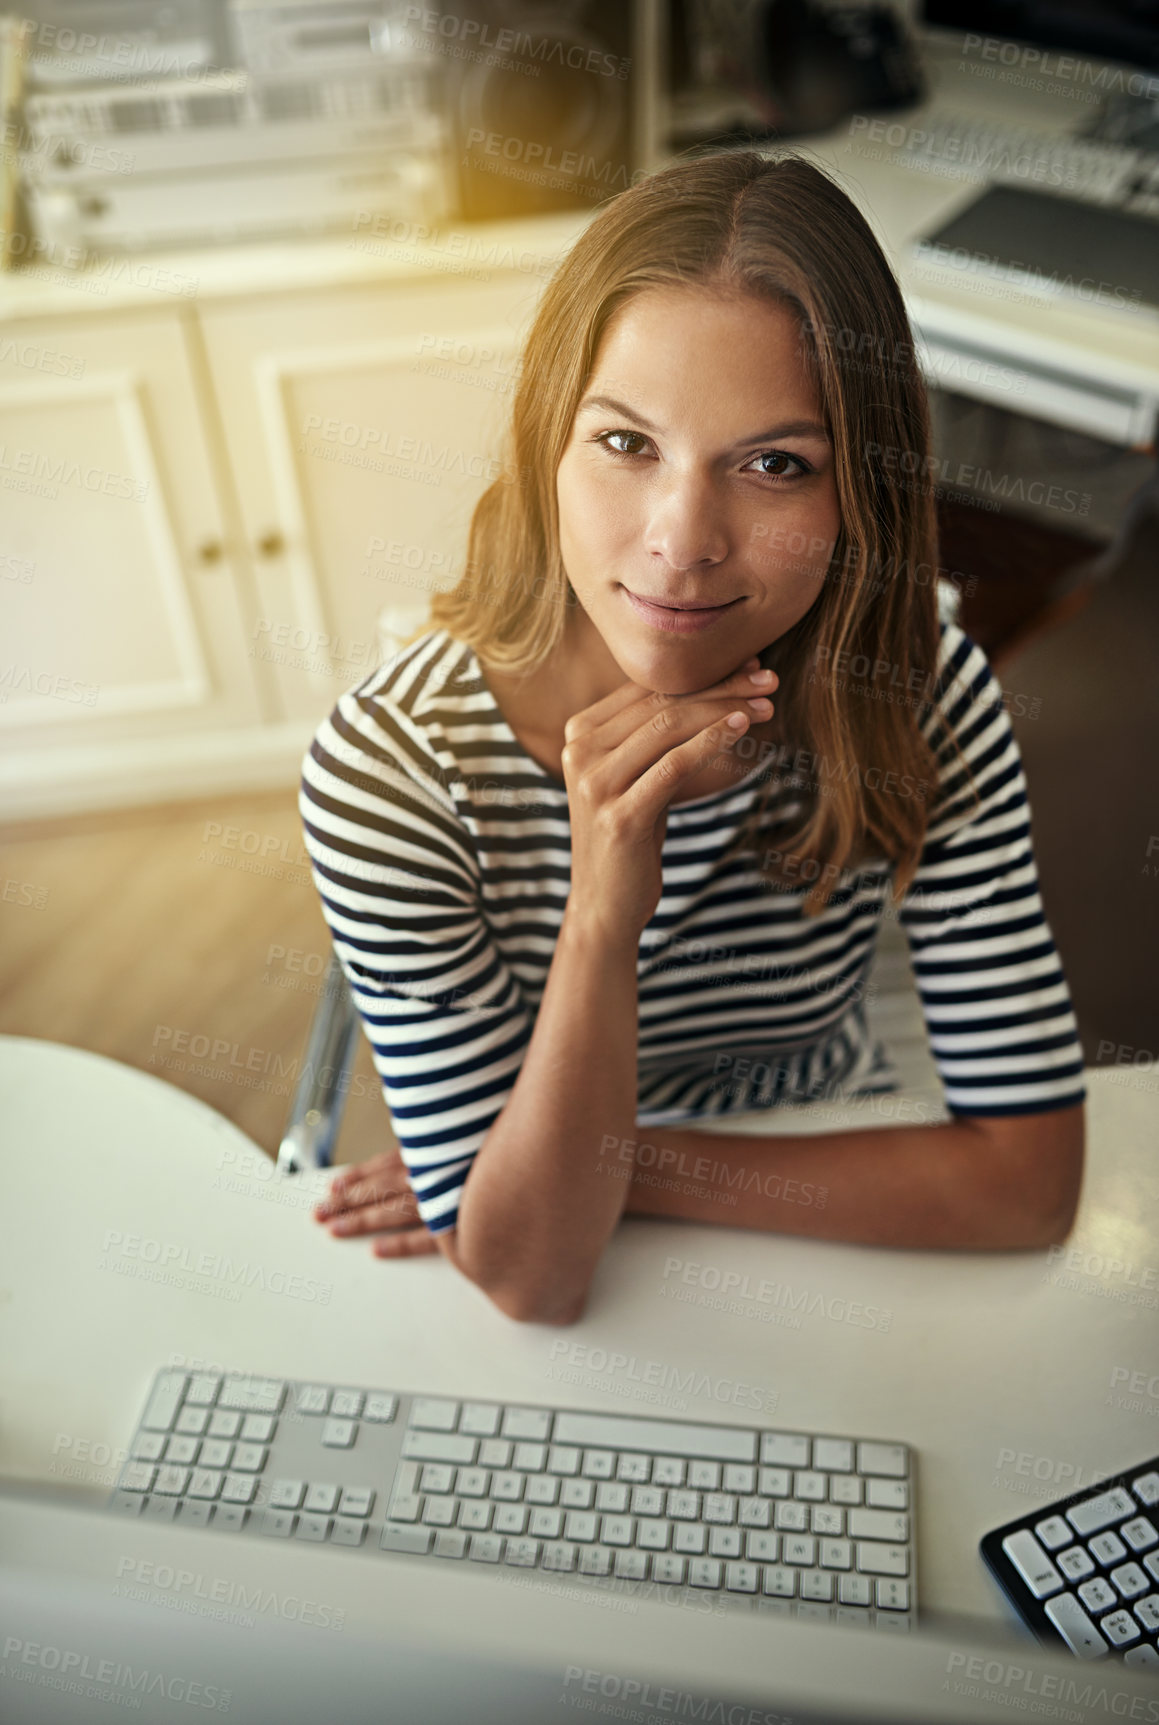 Buy stock photo High angle portrait of a young woman working on a computer in her home office